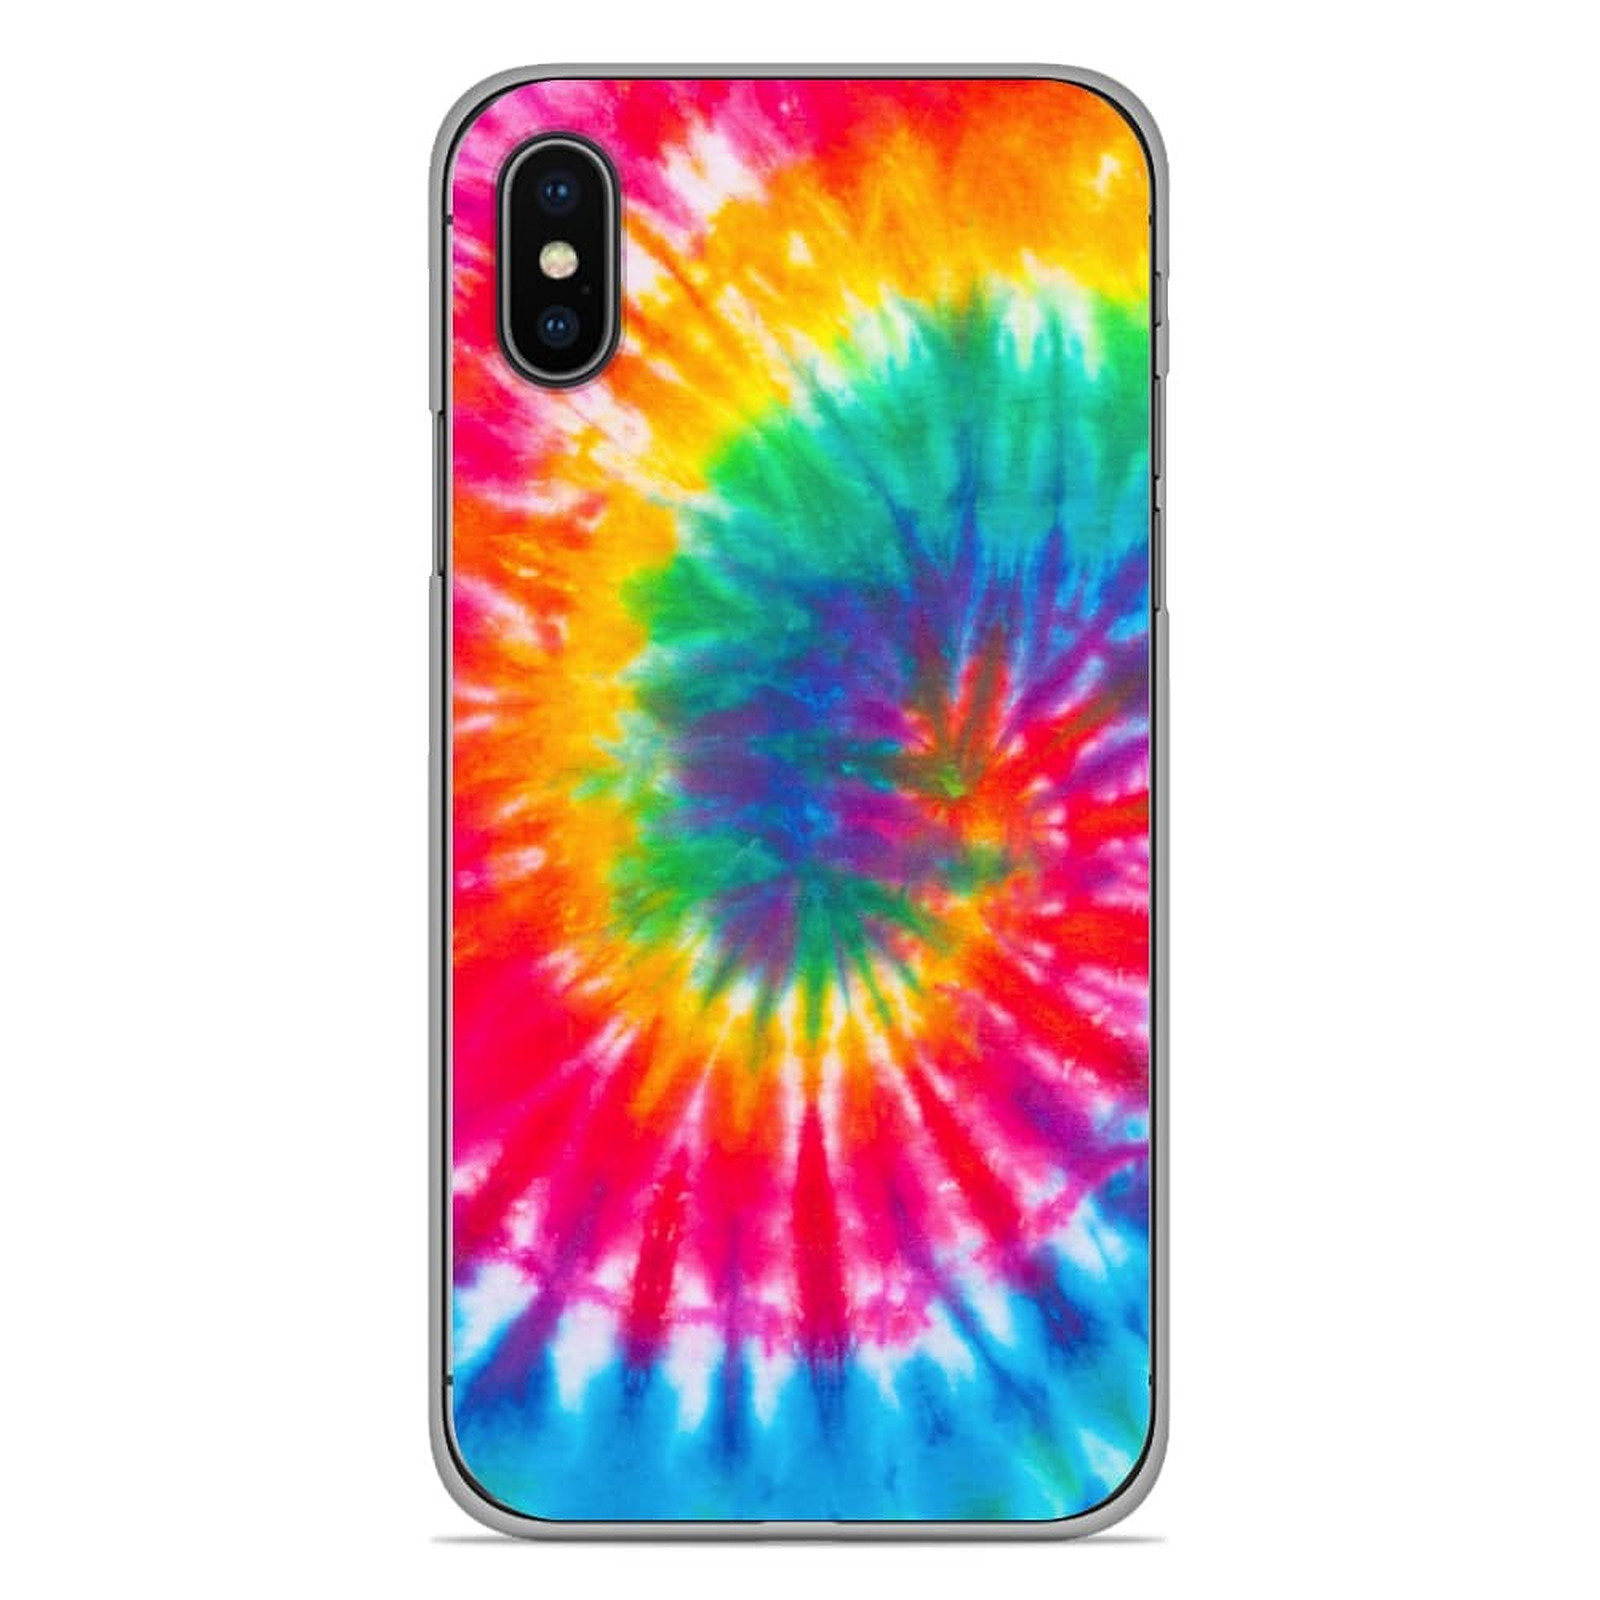 1001 Coques Coque silicone gel Apple iPhone XS Max motif Tie Dye Spirale - Coque telephone 1001Coques